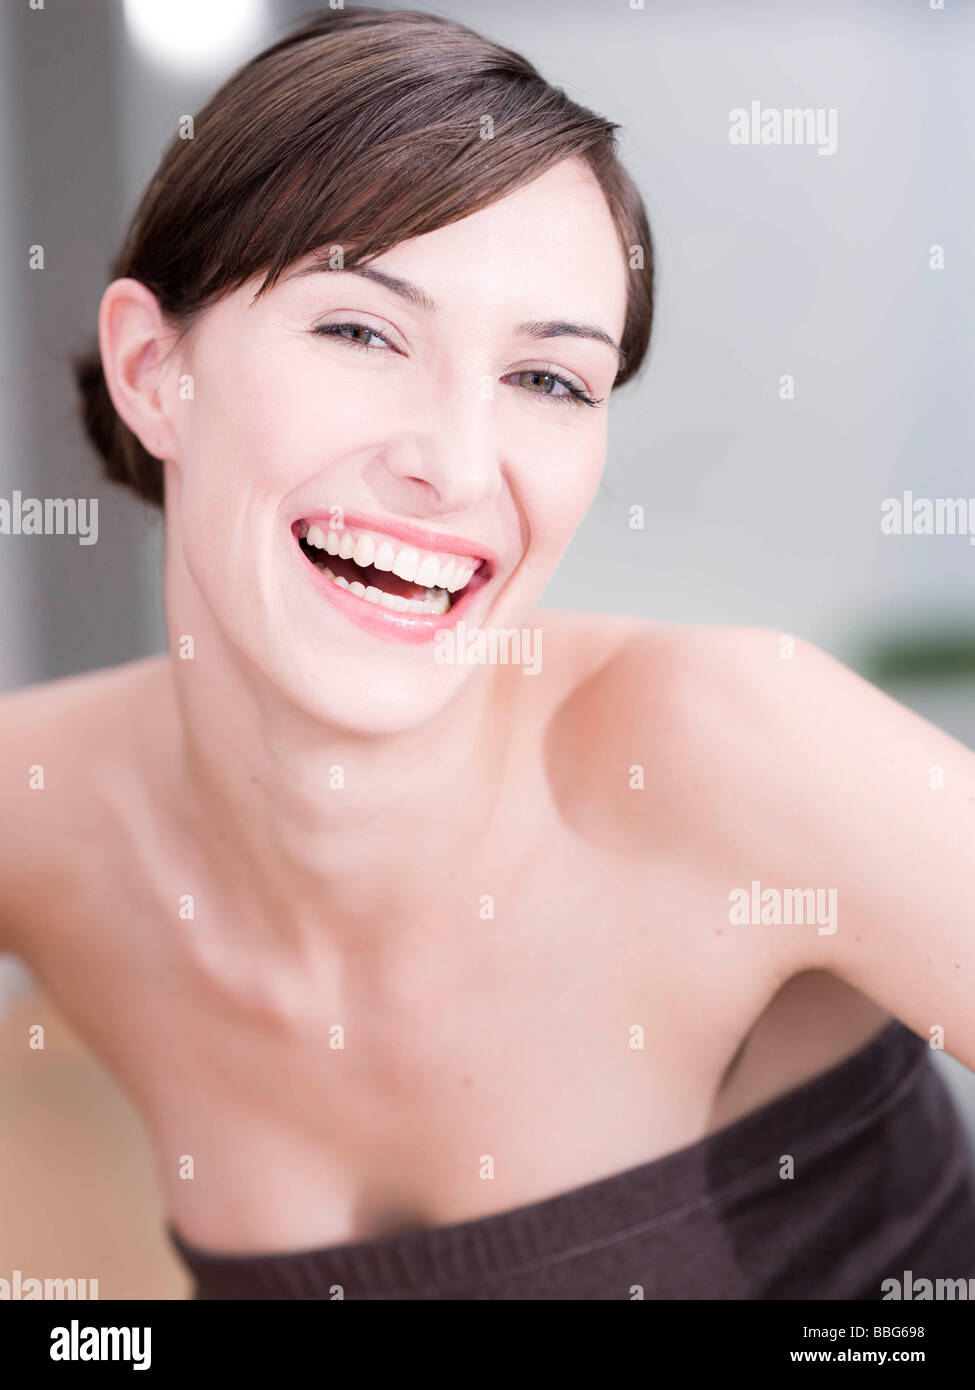 Woman making a face Stock Photo